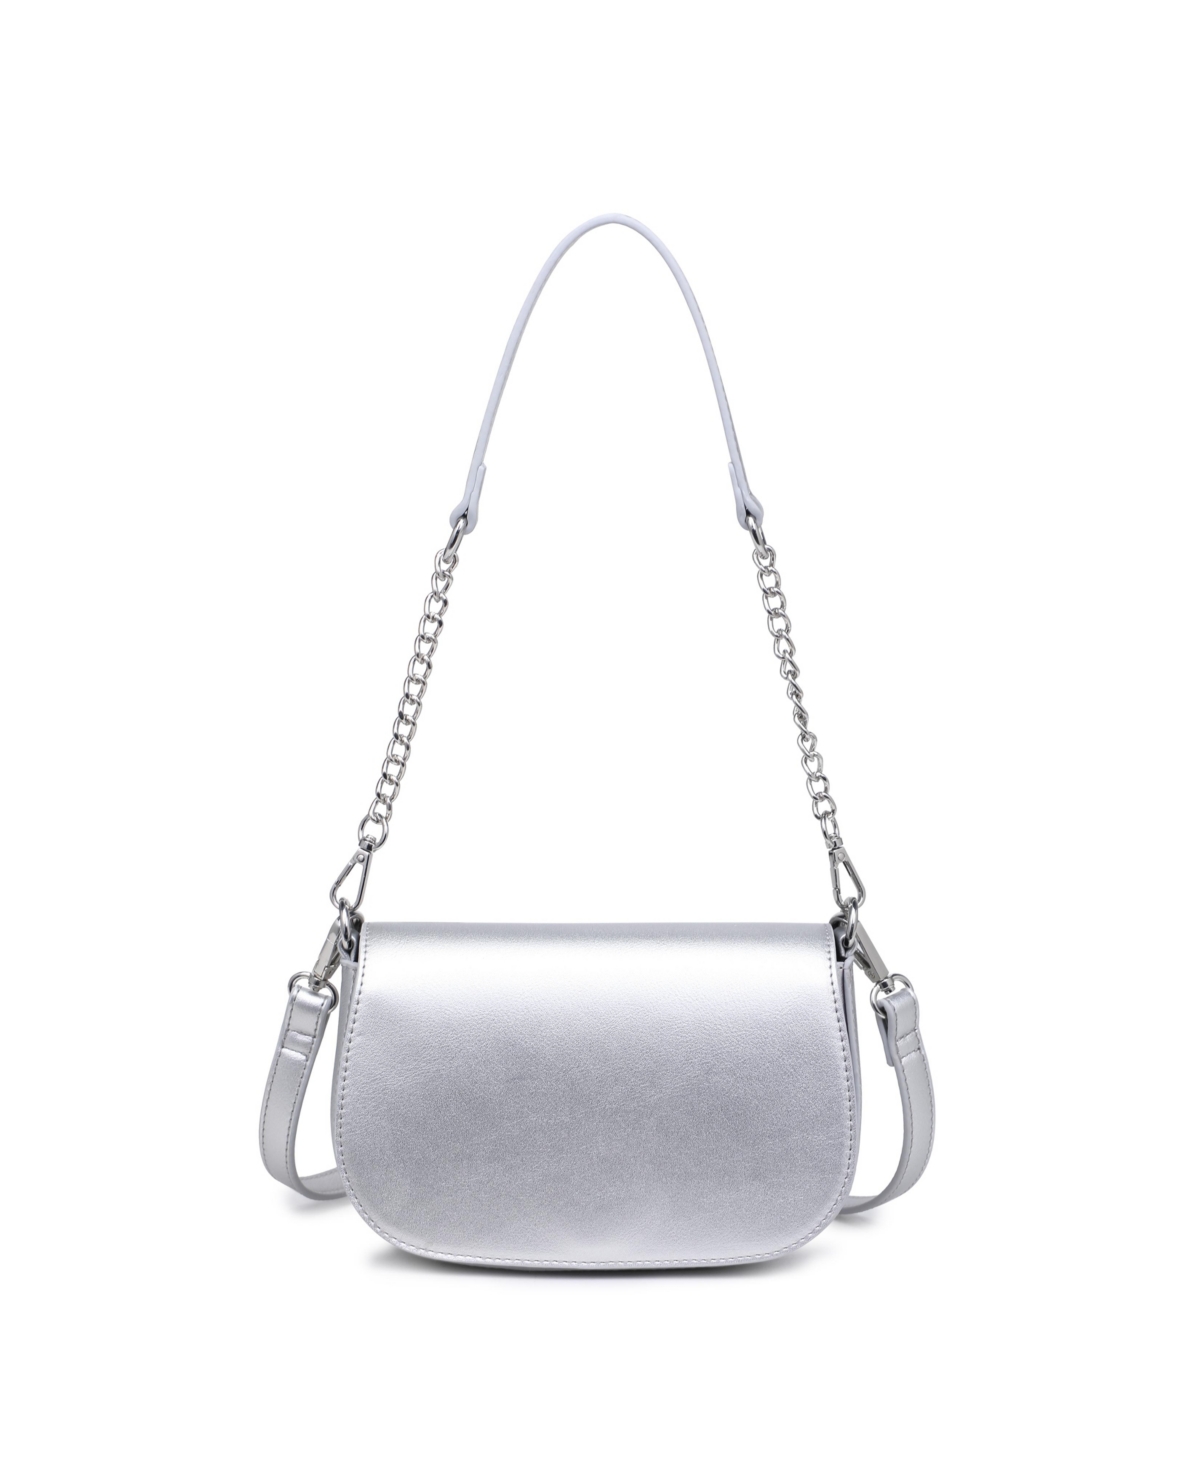 Urban Expressions Tracie Shoulder Bag In Silver